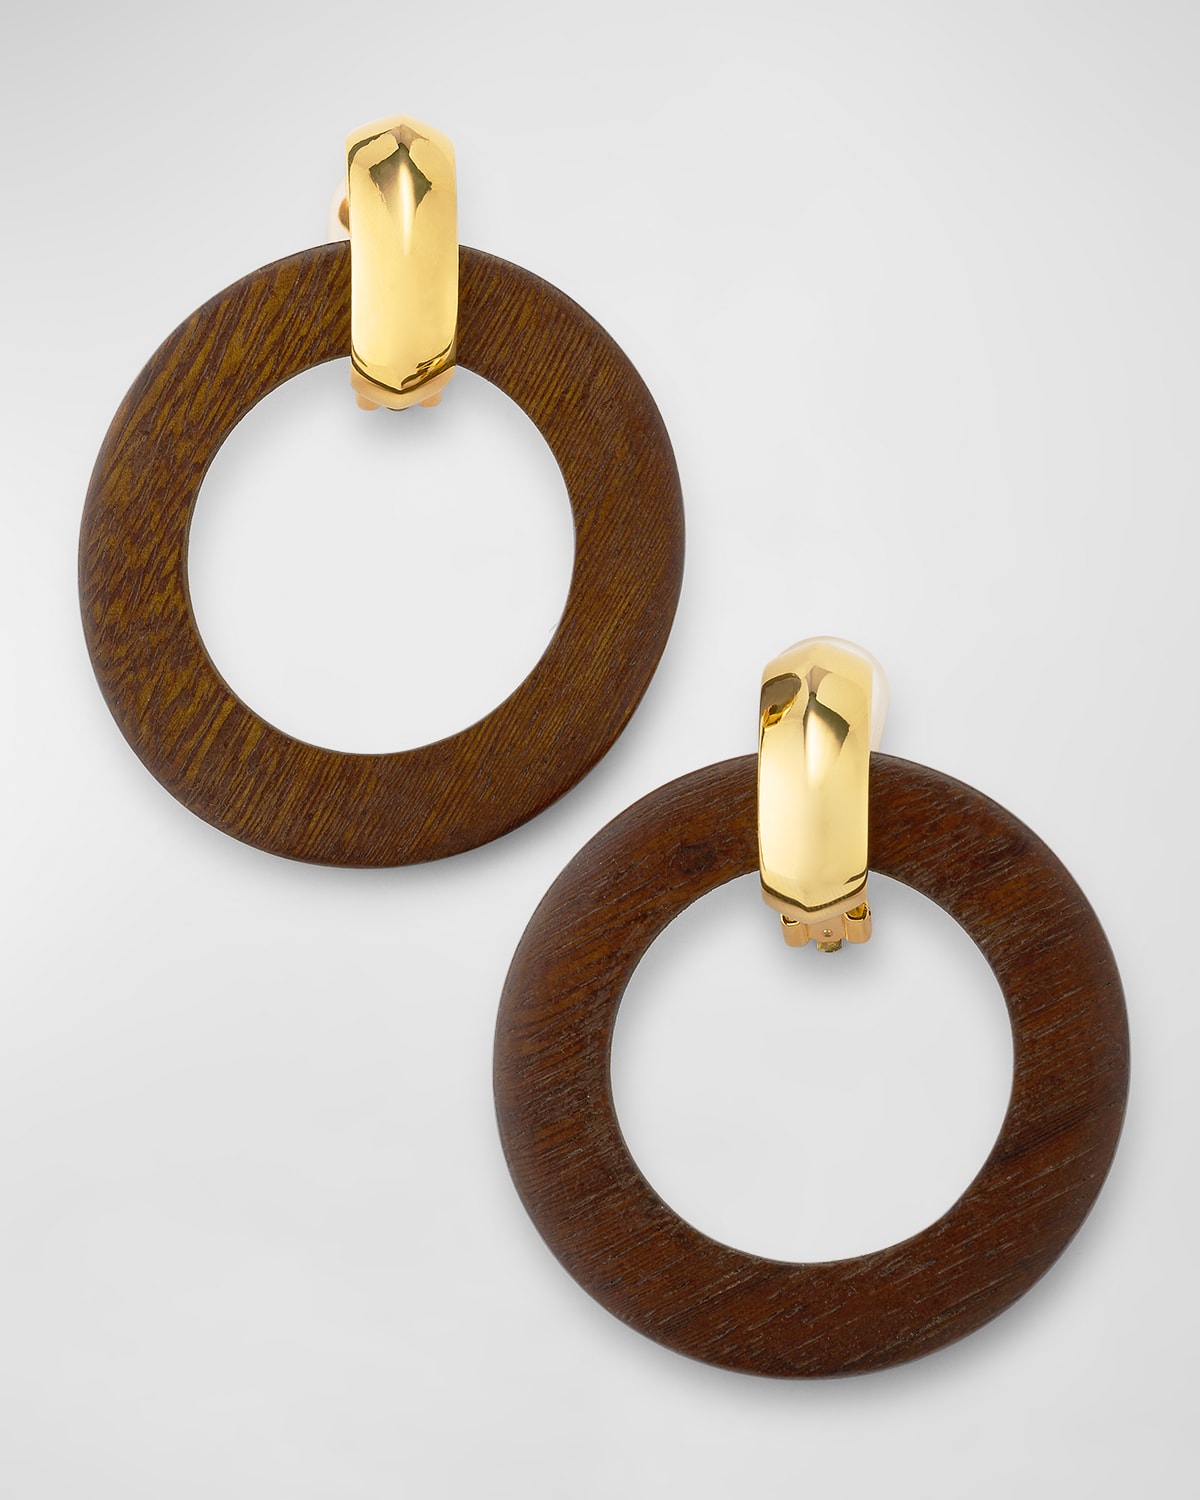 Wood Ring Doorknocker Clip Earrings with Polished Top